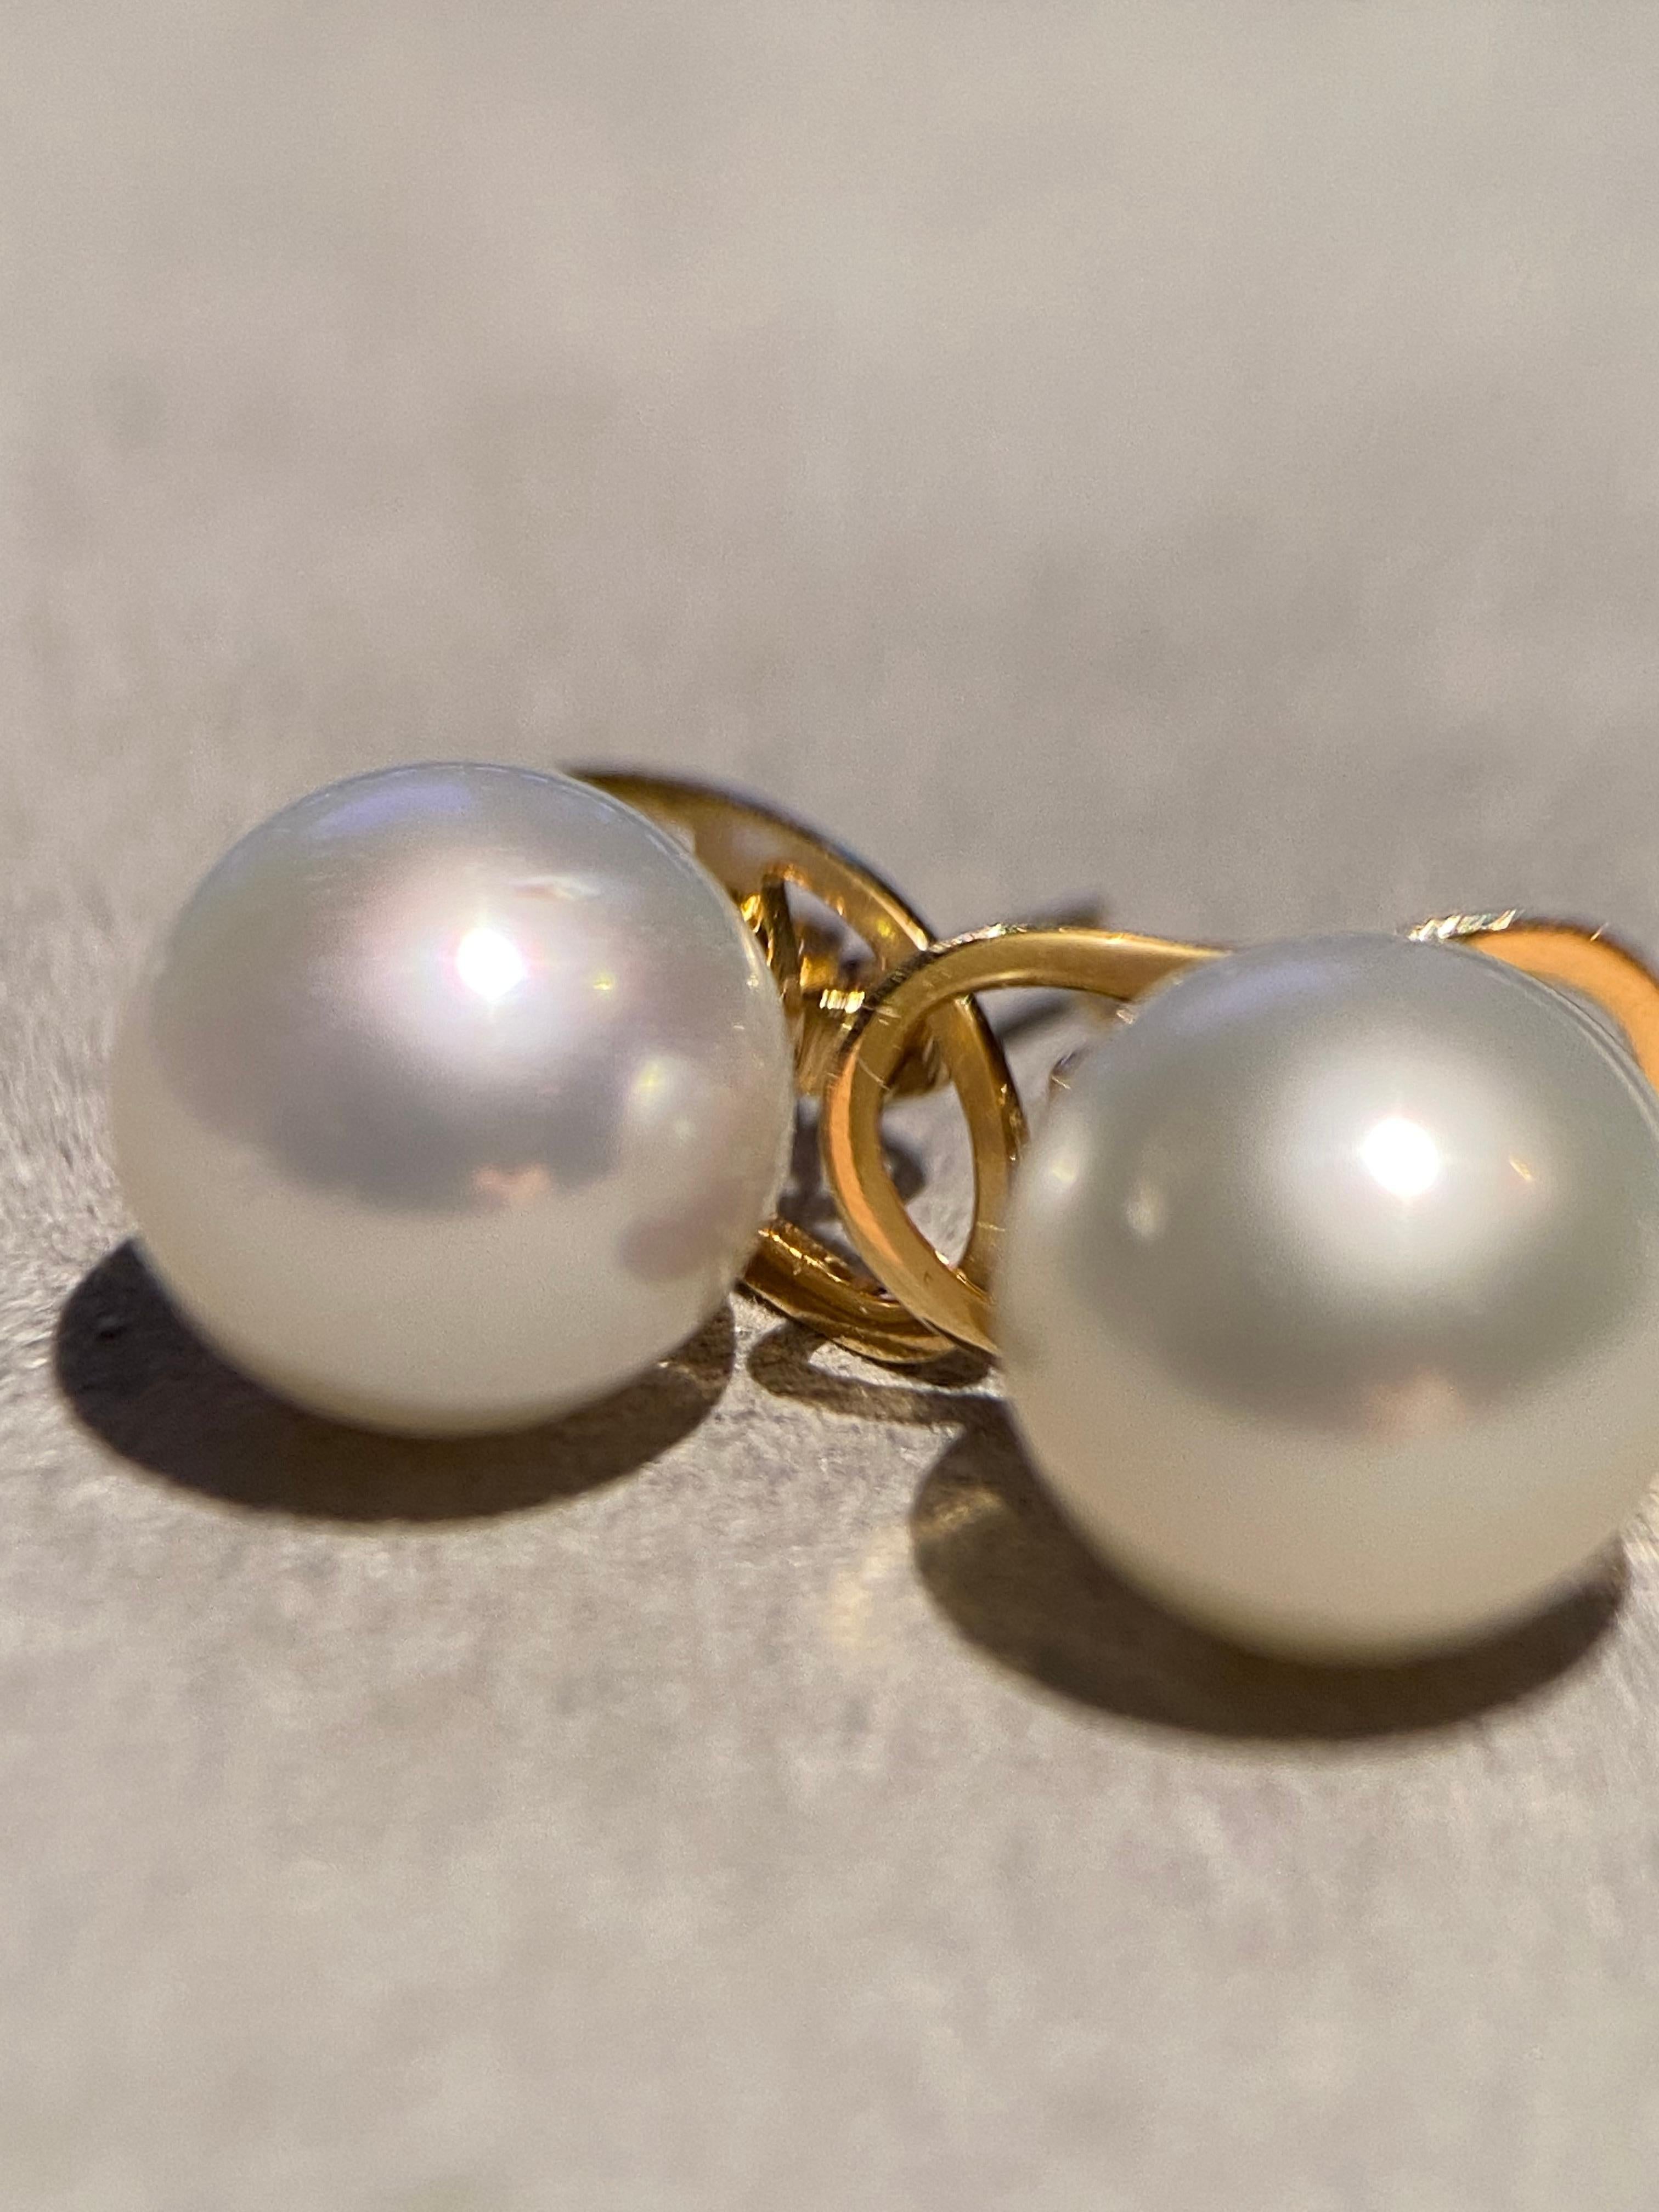 A pair of Australian south sea pearls measuring 9-10mm. The Pearls are round in shape with very minor surface blemishes and imperfection. The pearls are of high lustre with green and pink overstone. The ear stud is set in 18k yellow gold with